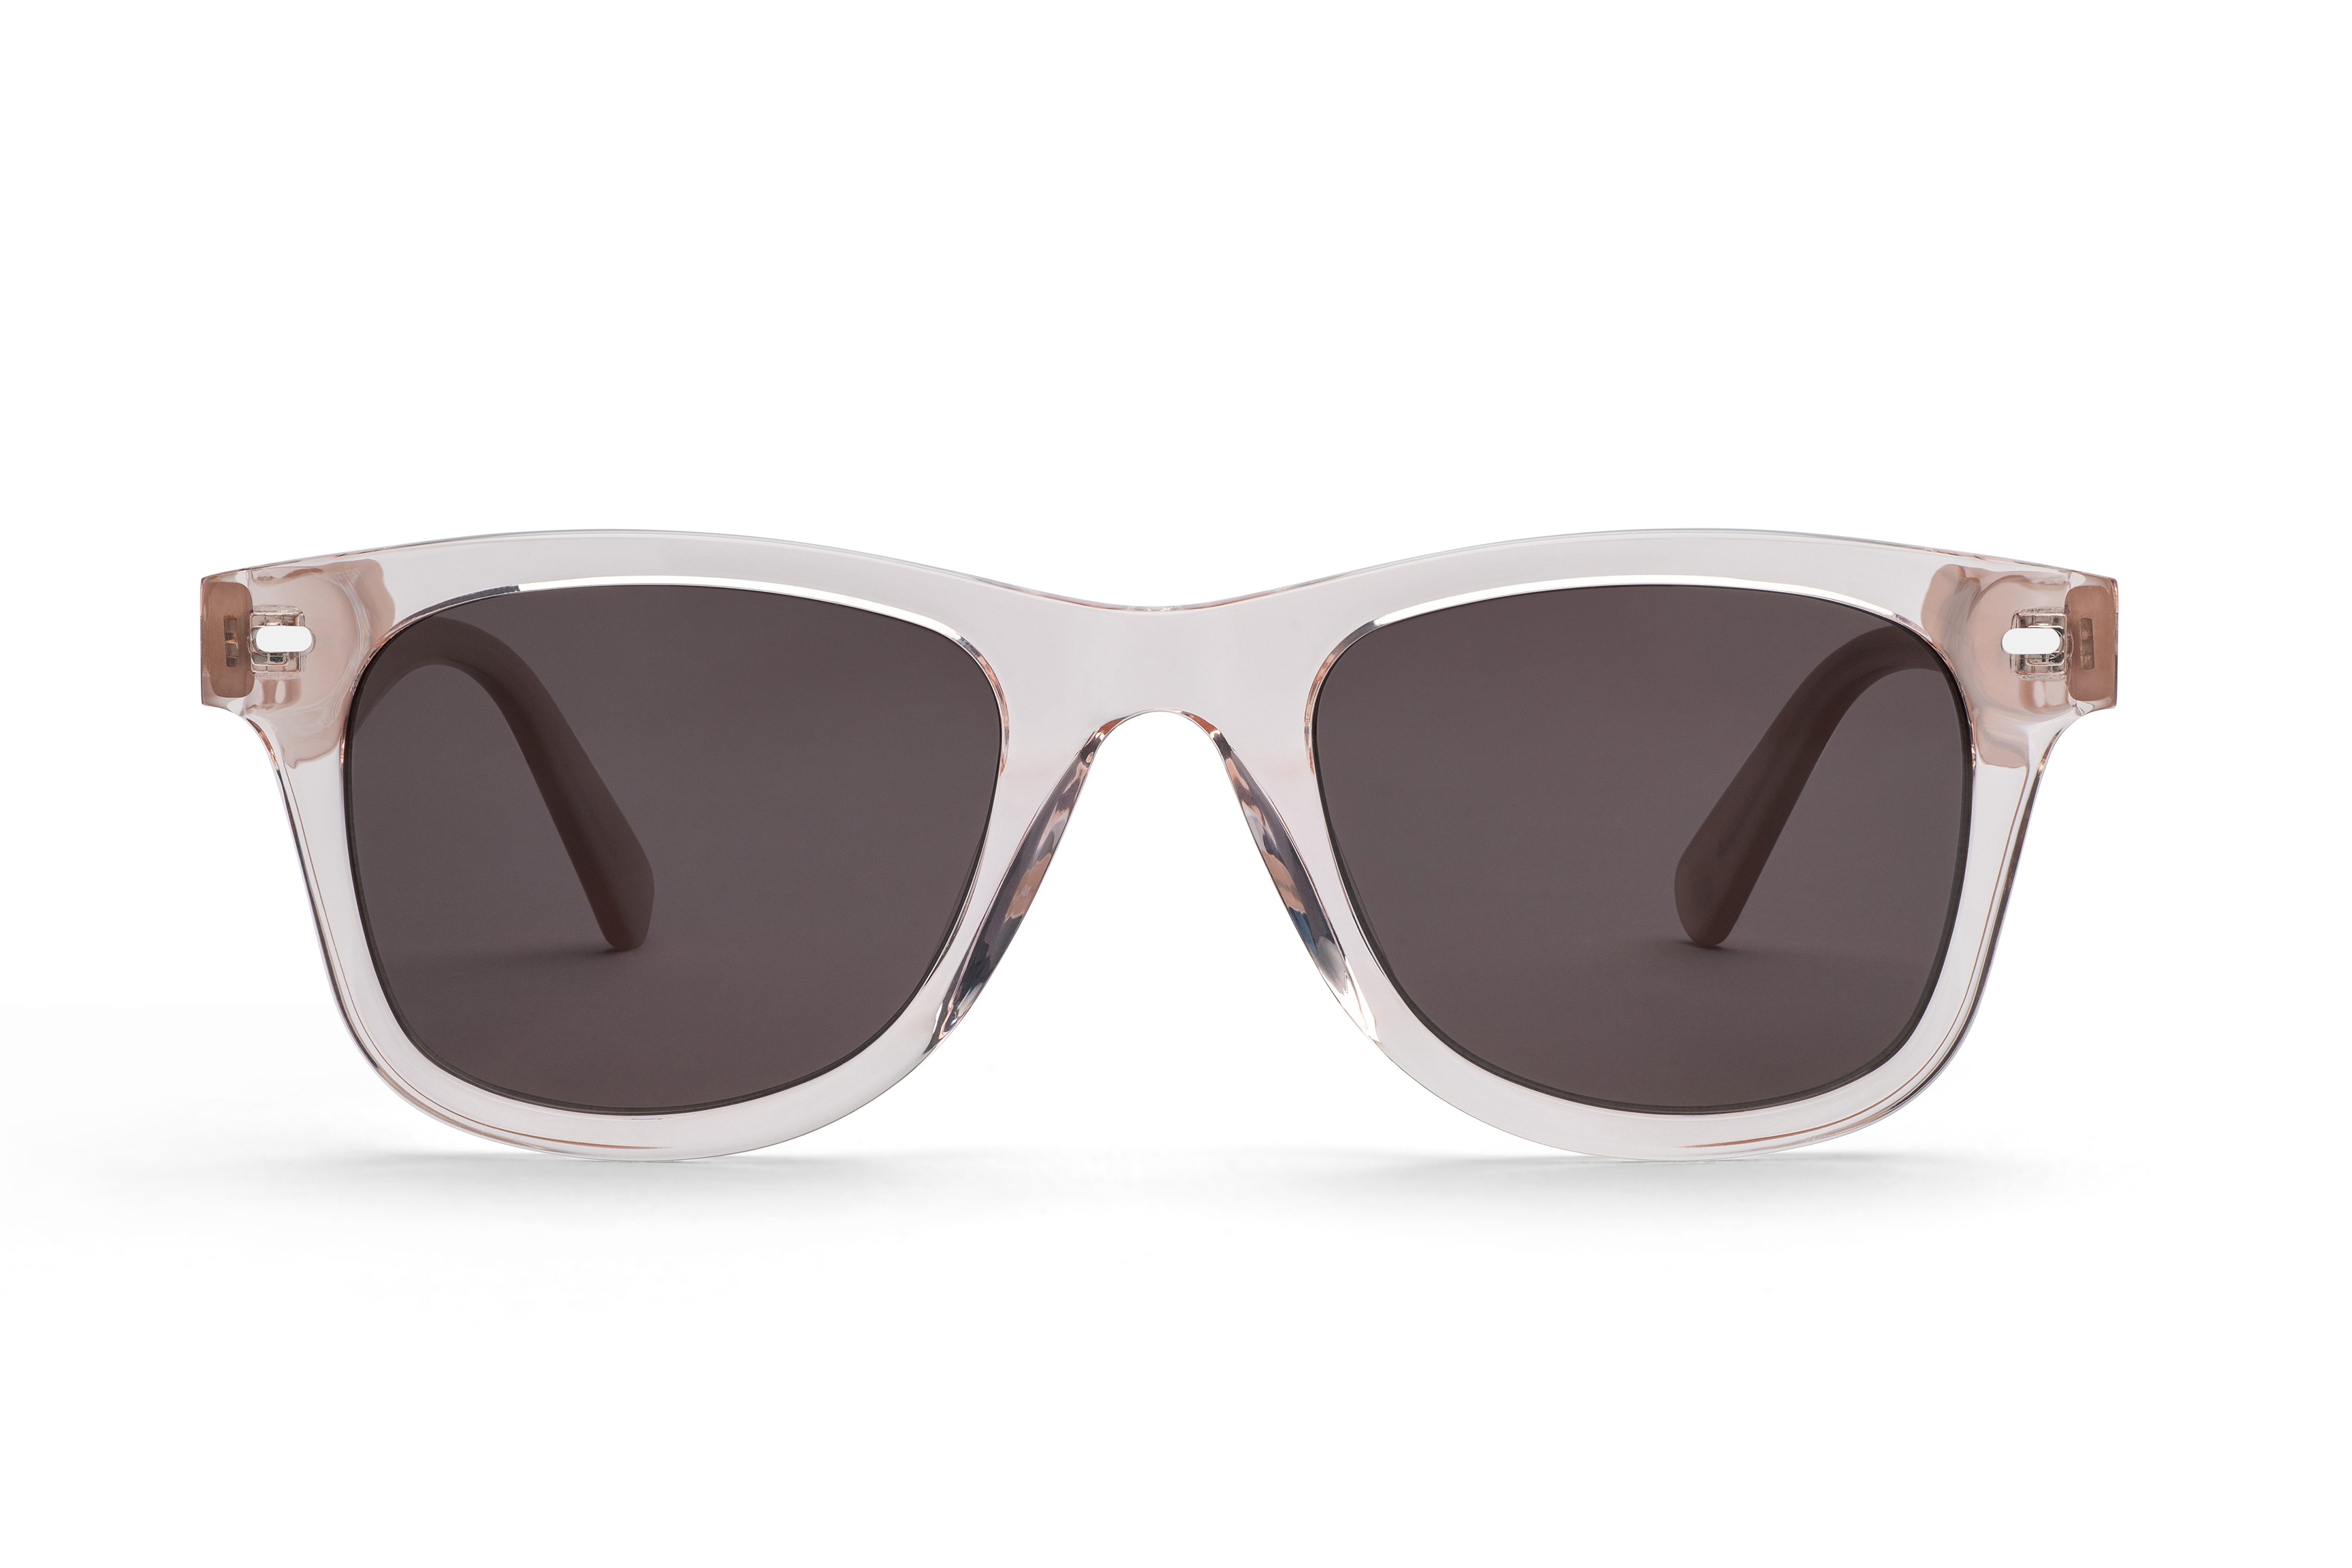 Rocket Eyewear SPT Classic Rose-Tinted Crystal &amp; Blush with Brown Polarized Lenses (Limited Edition)